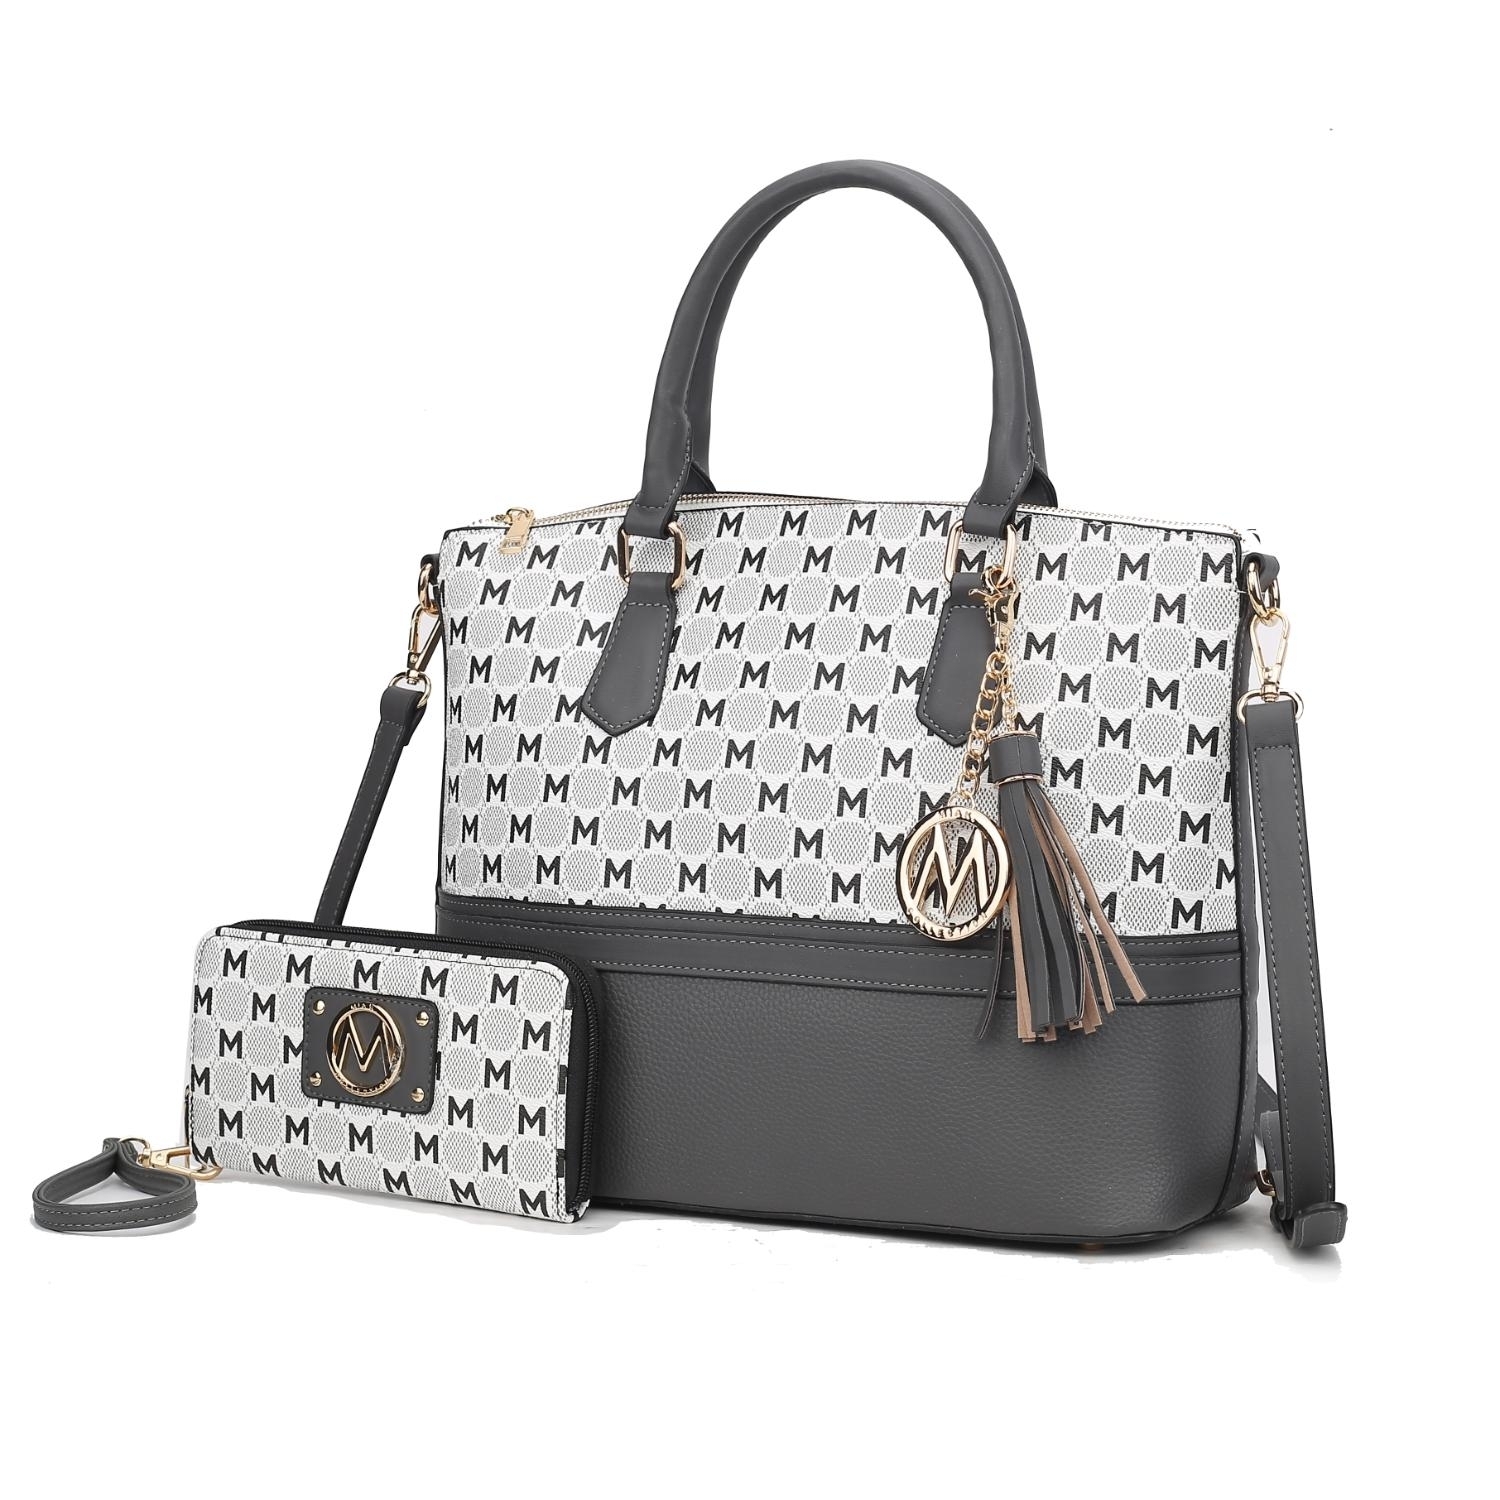 MKF Collection Saylor Circular M Emblem Print Women's Tote Bag With Matching Wristlet Wallet 2 Pieces By Mia K - Charcoal